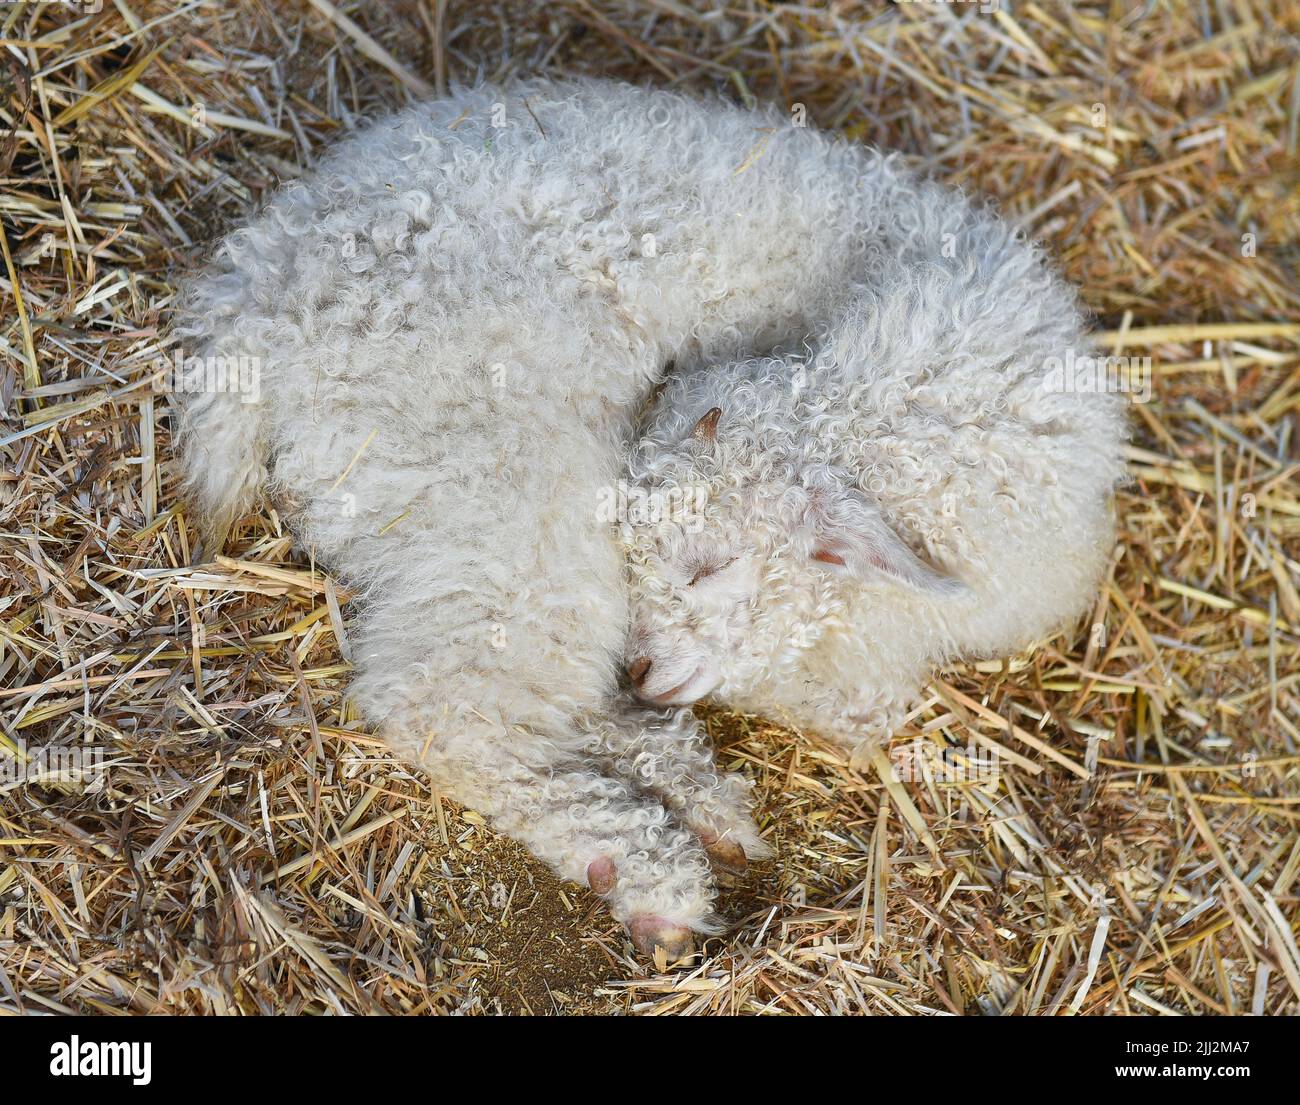 Two month old female Angora Goat asleep in the hay. Stock Photo